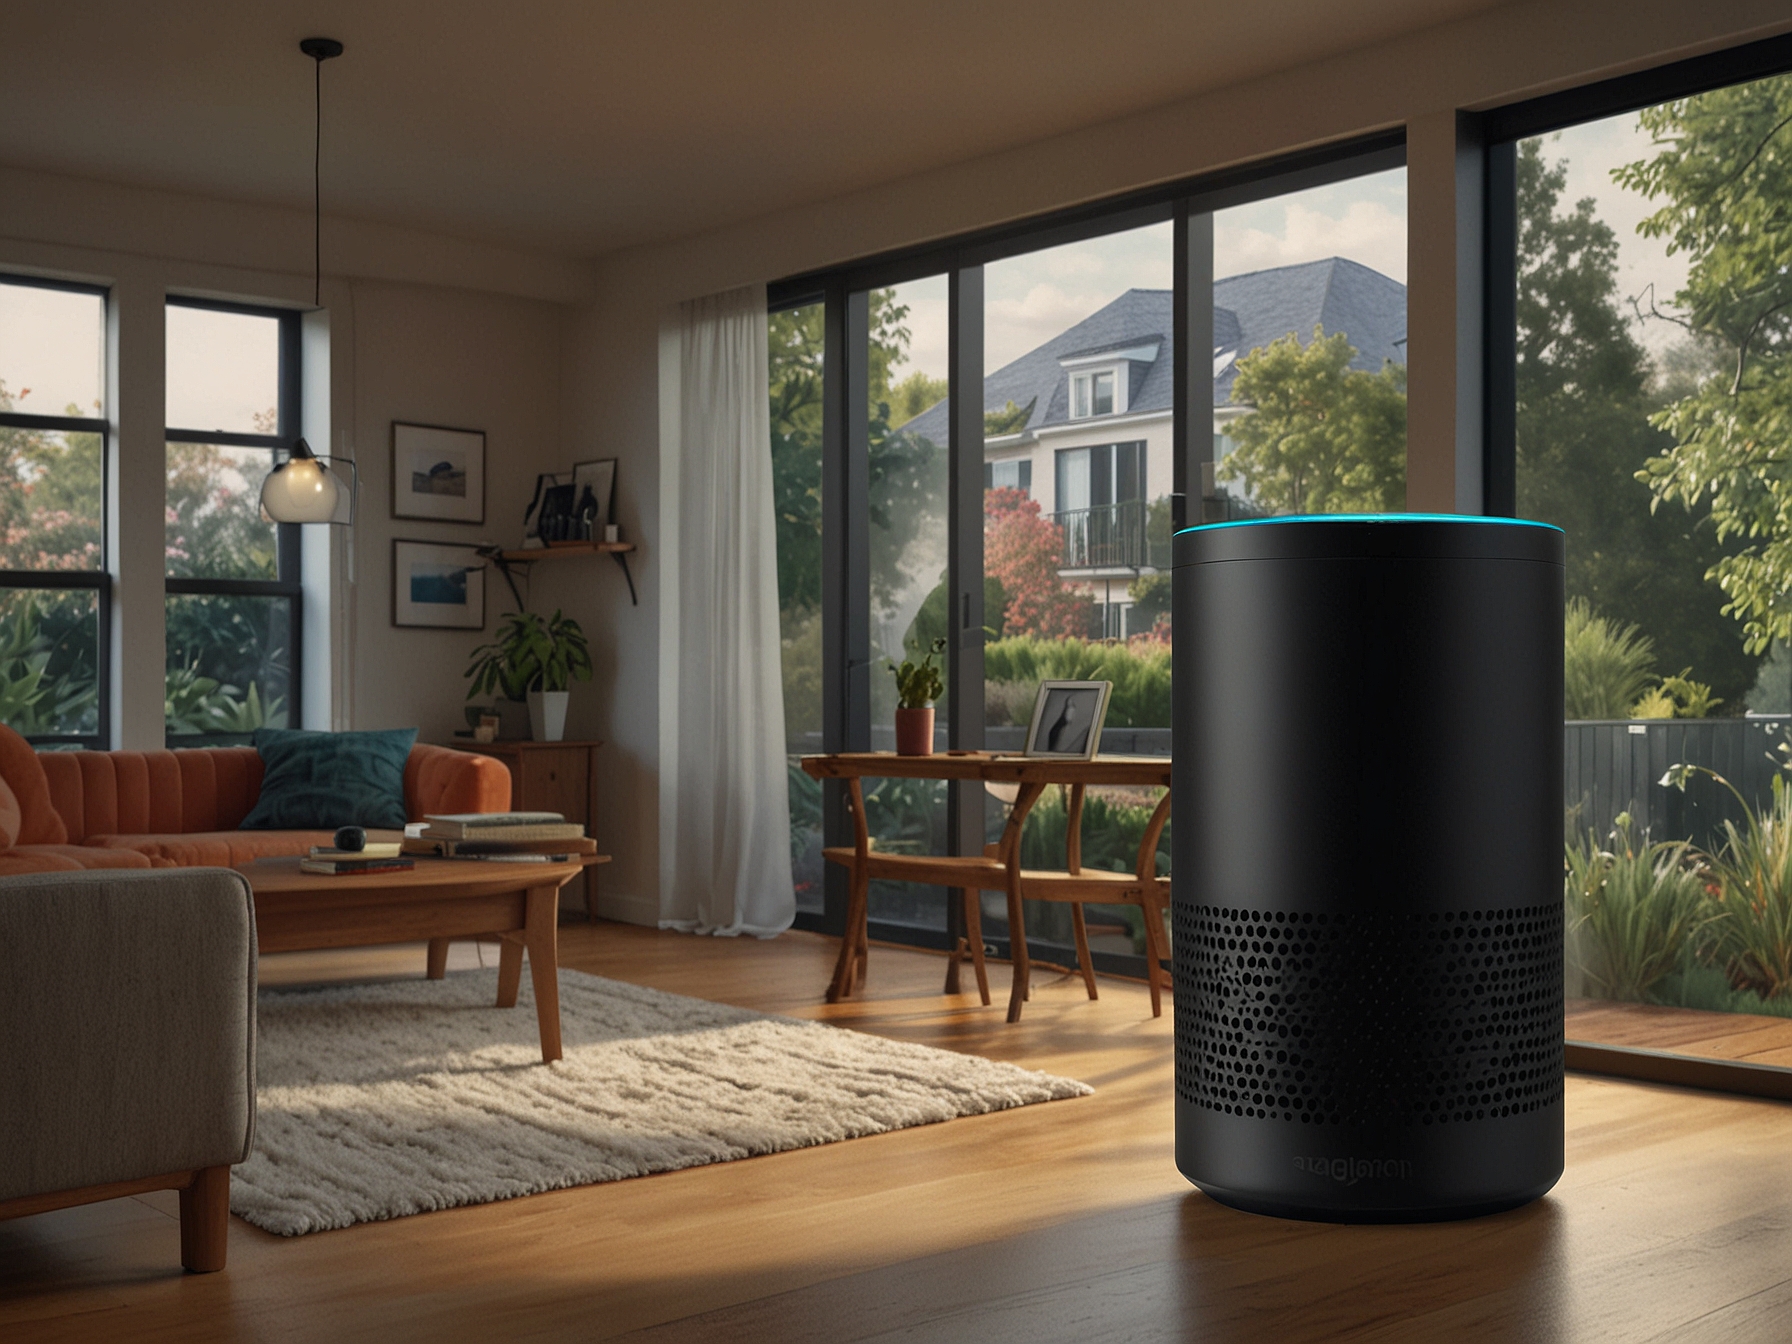 Visual representation of advanced Alexa features, including enhanced natural language processing and improved home automation, as part of a new subscription model.